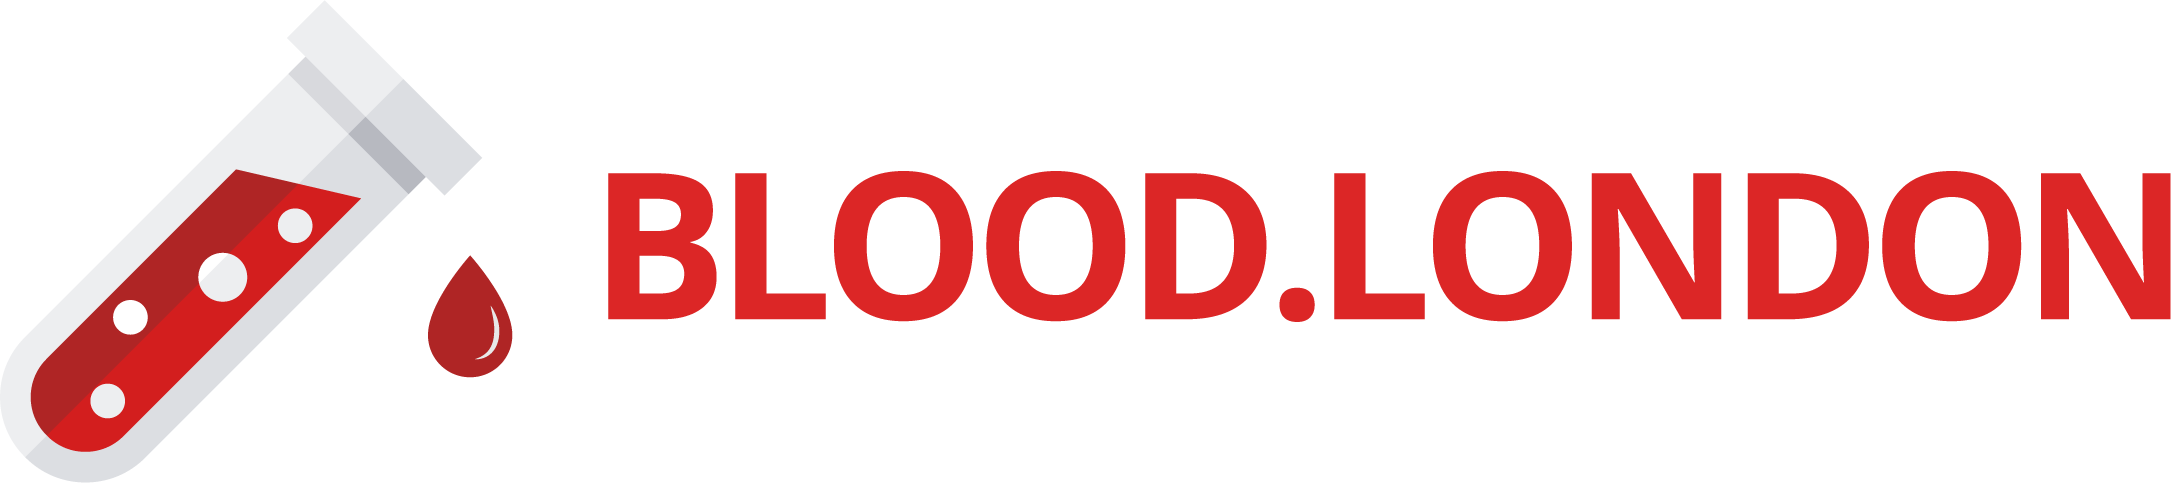 Private Blood Tests London Logo